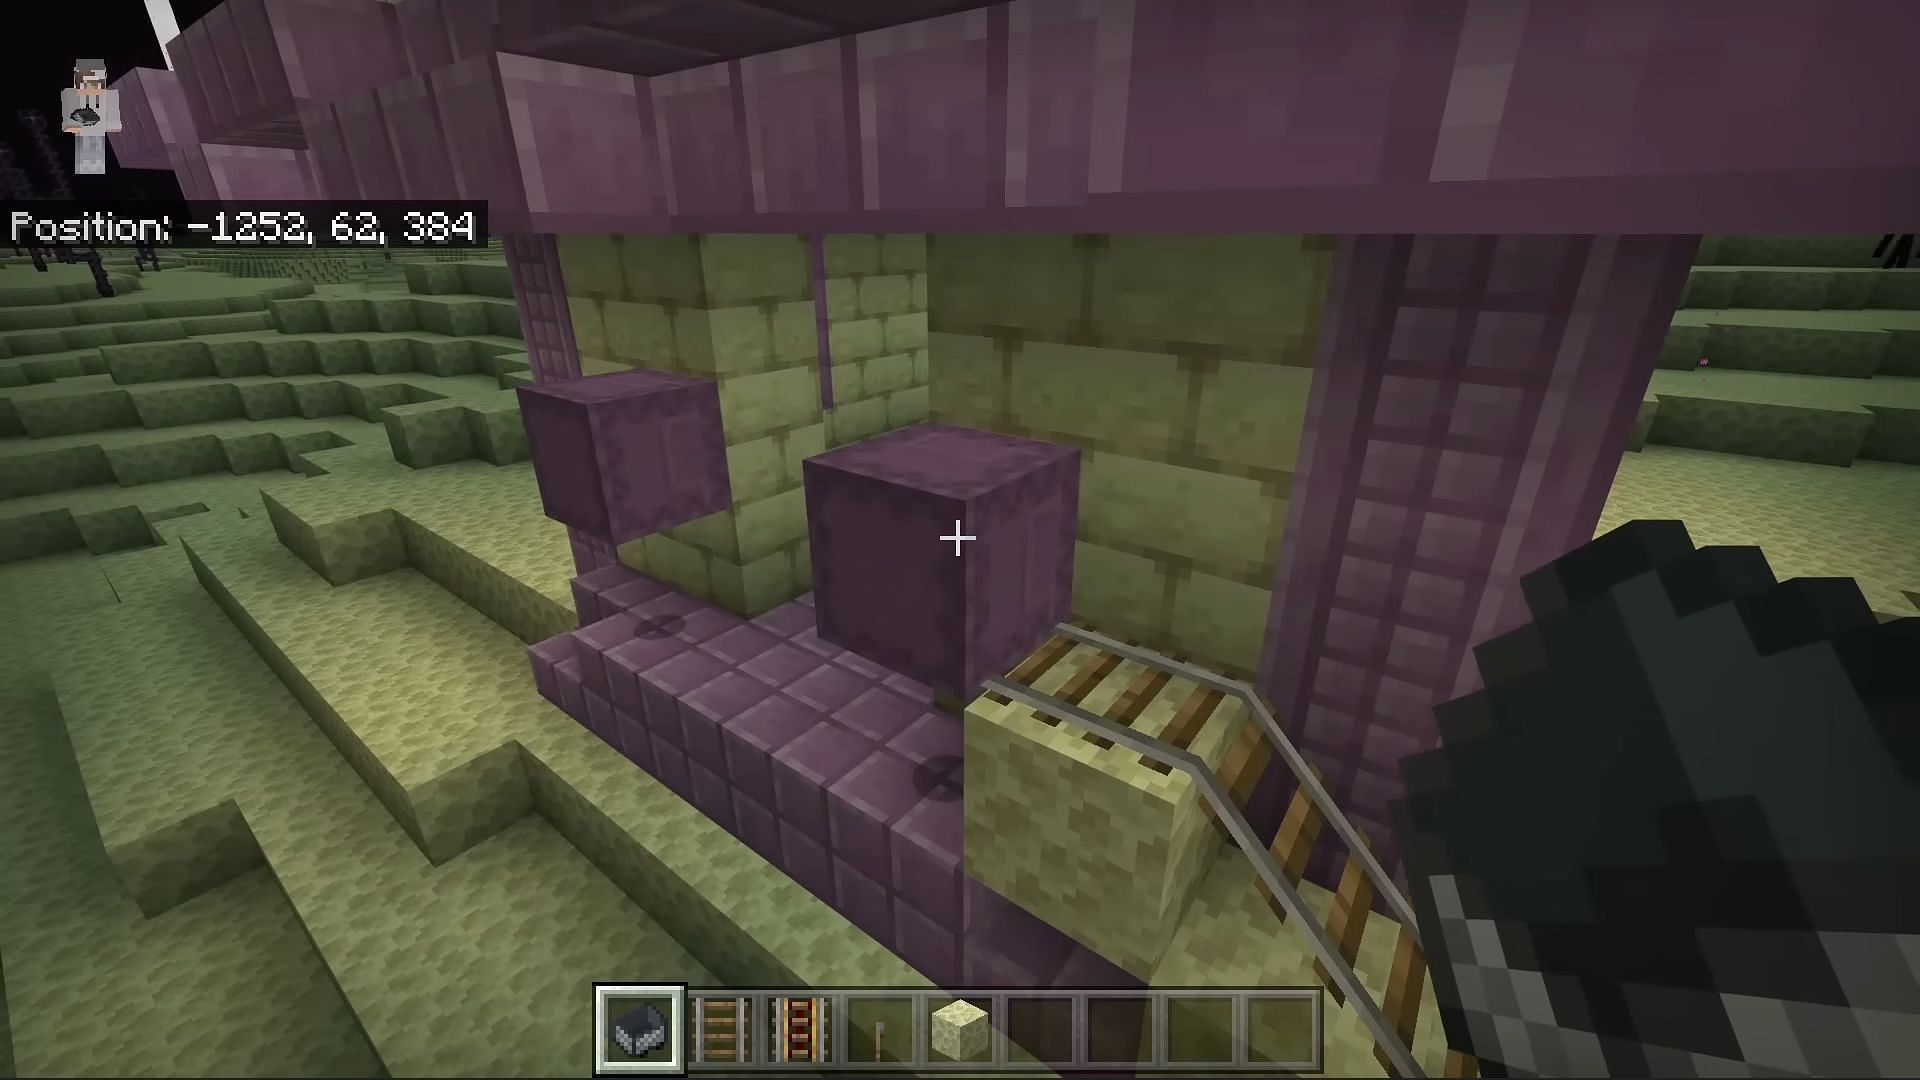 Shulkers drop shulker shells that are extremely useful for inventory management in Minecraft (Image via Mojang)